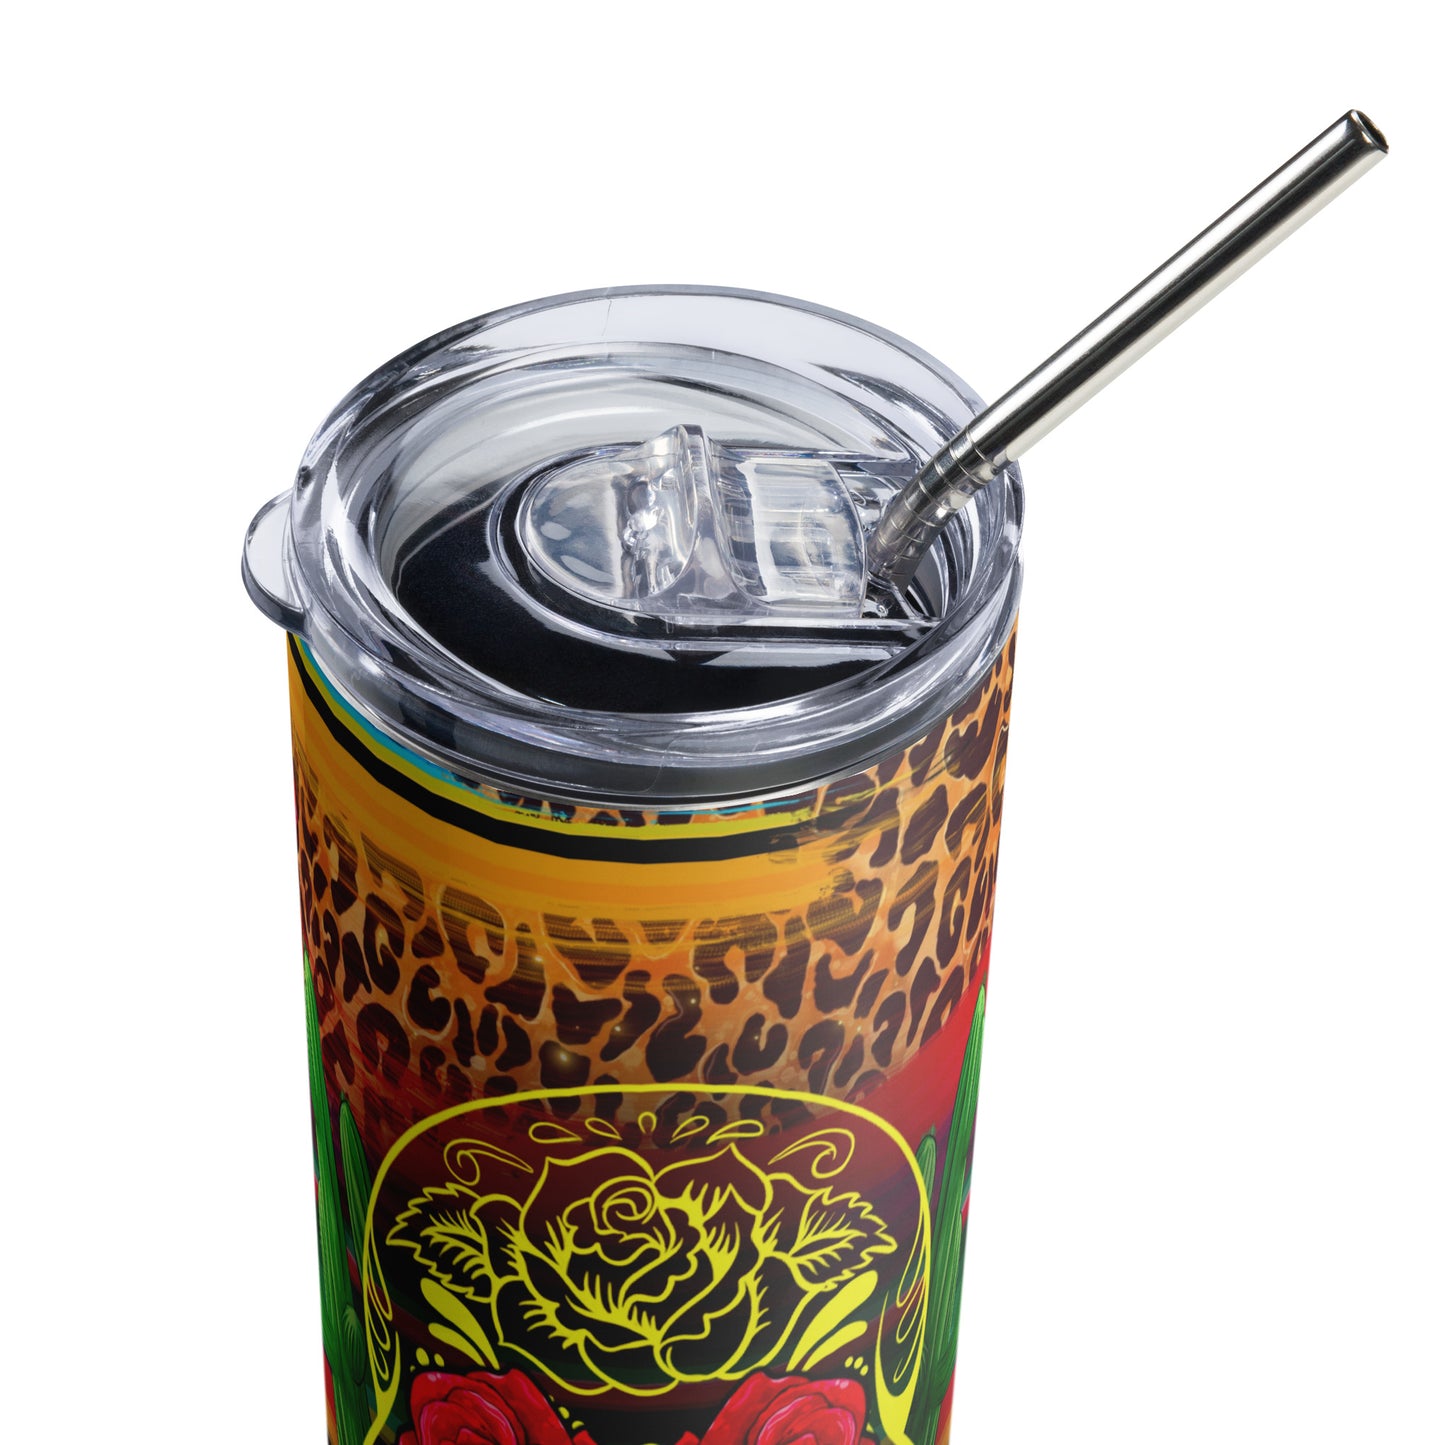 Mexican Calavera Stainless steel tumbler